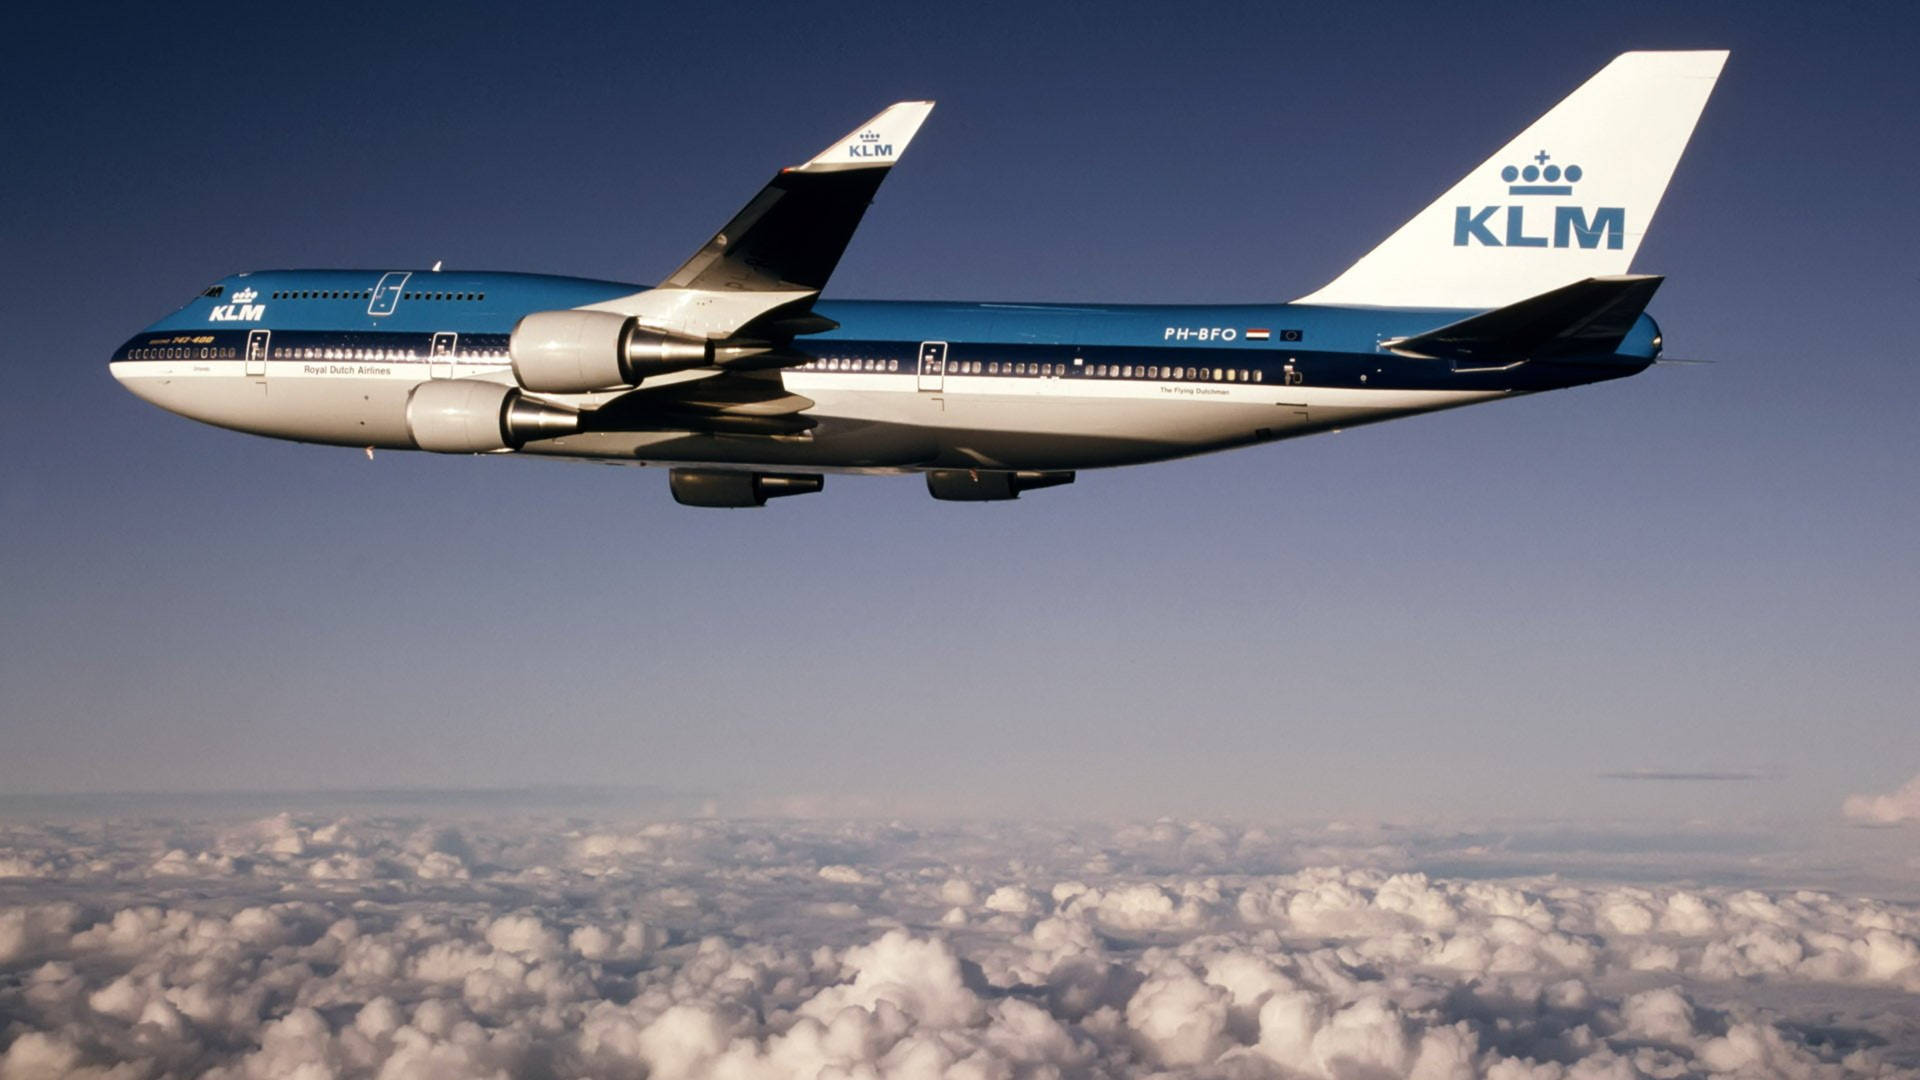 Blue And White KLM Airplane 4K Wallpaper